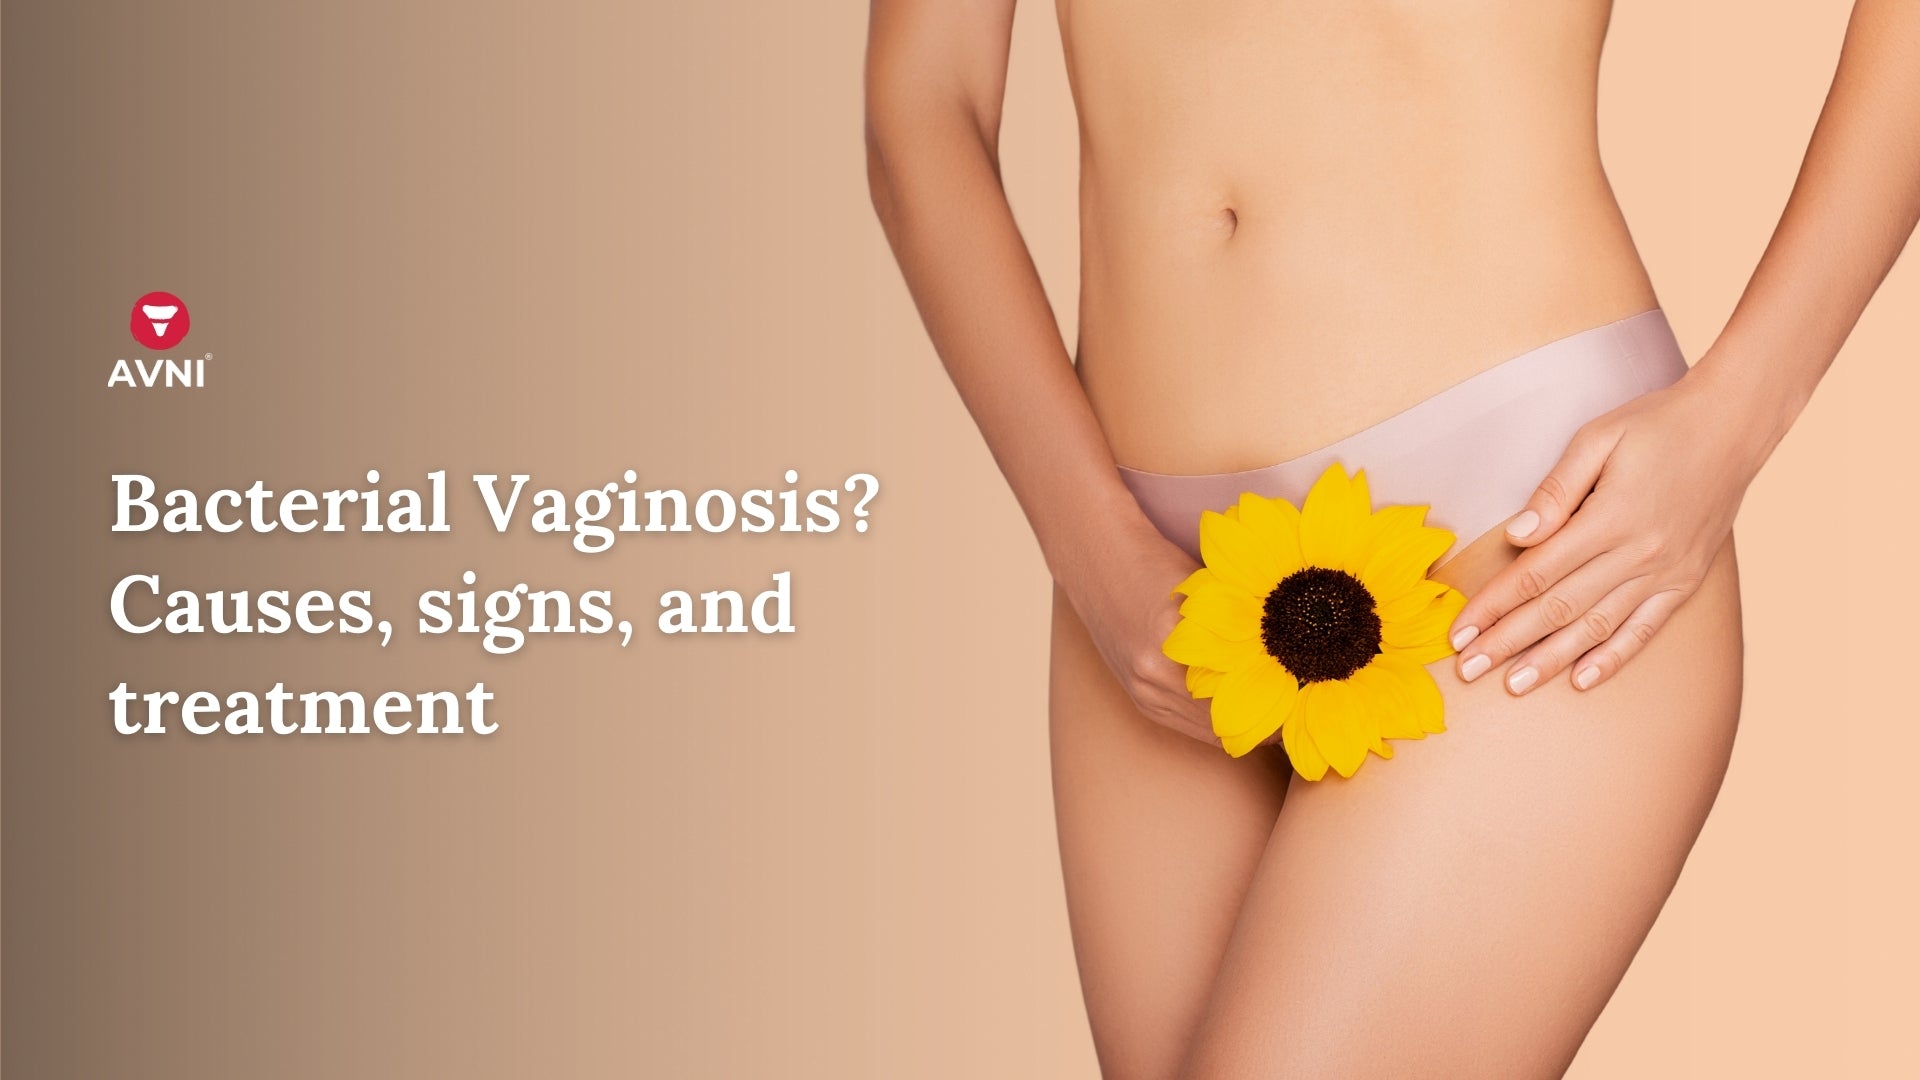 Bacterial Vaginosis? Causes, signs, and treatment